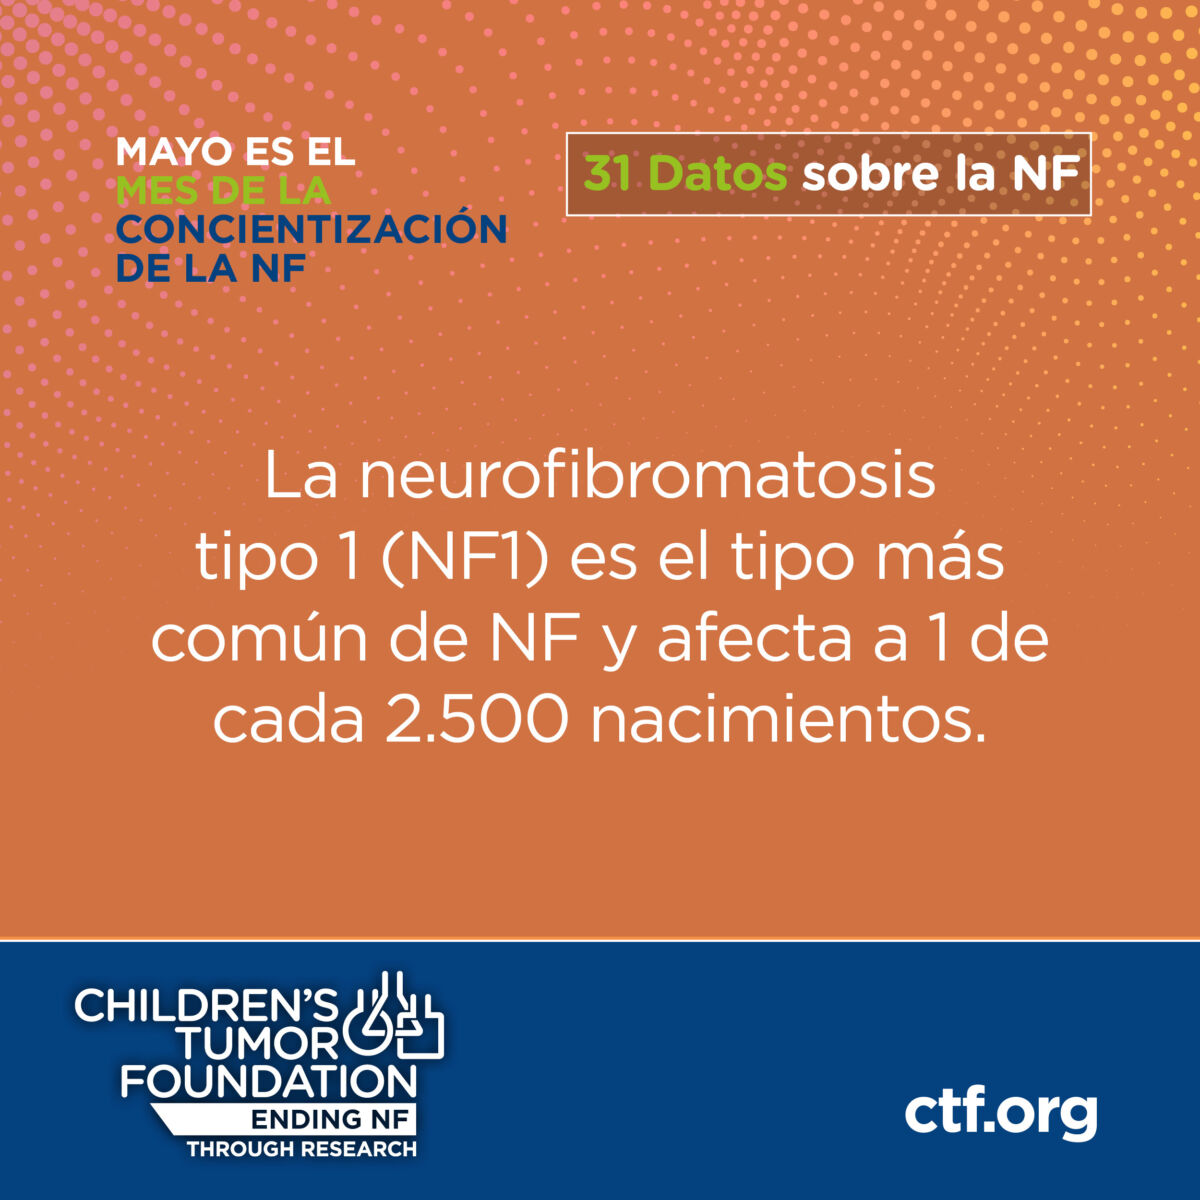 Infographic highlighting may as neurofibromatosis awareness month, stating that neurofibromatosis type 1 (nf1) affects 1 in 2,500 births. includes the logos of the children's tumor foundation and the website ctf.org.